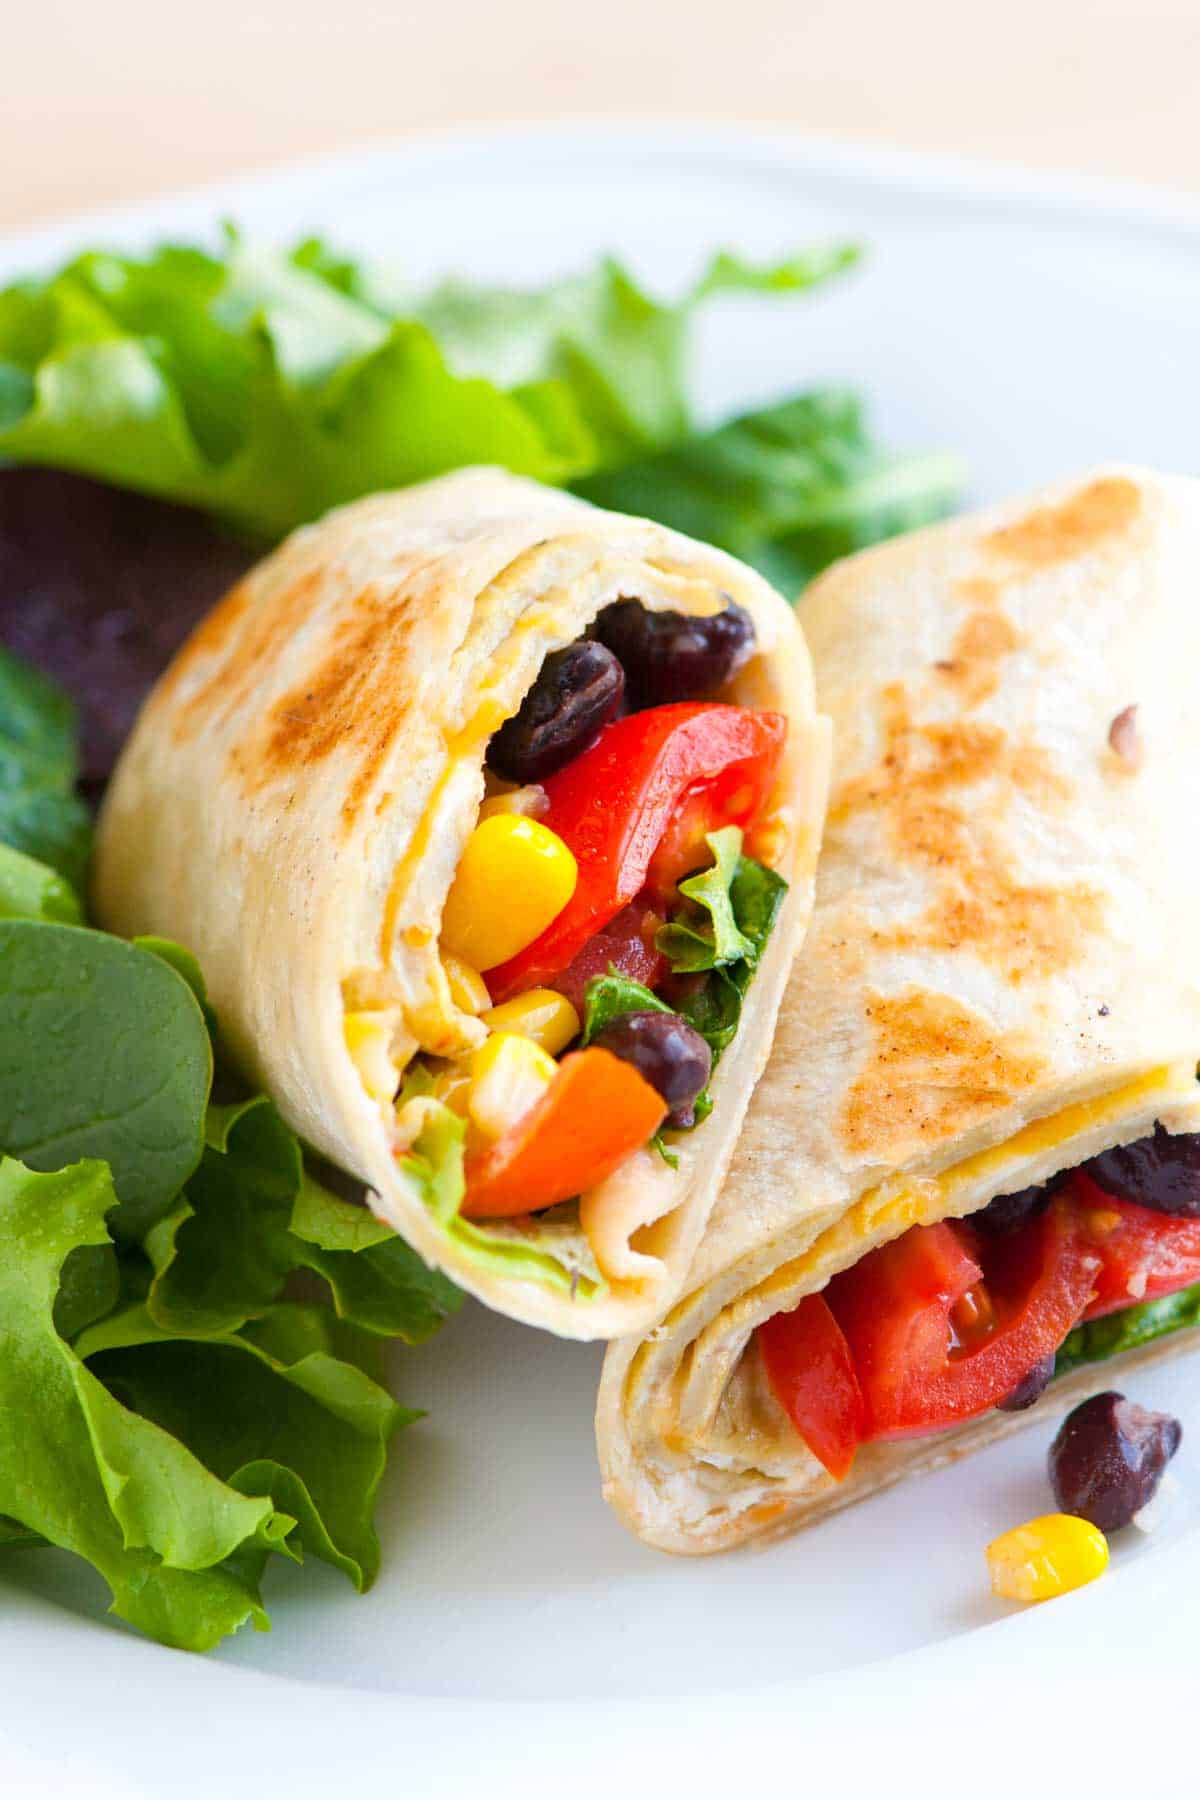 Meatless Black Bean, Egg and Corn Wraps